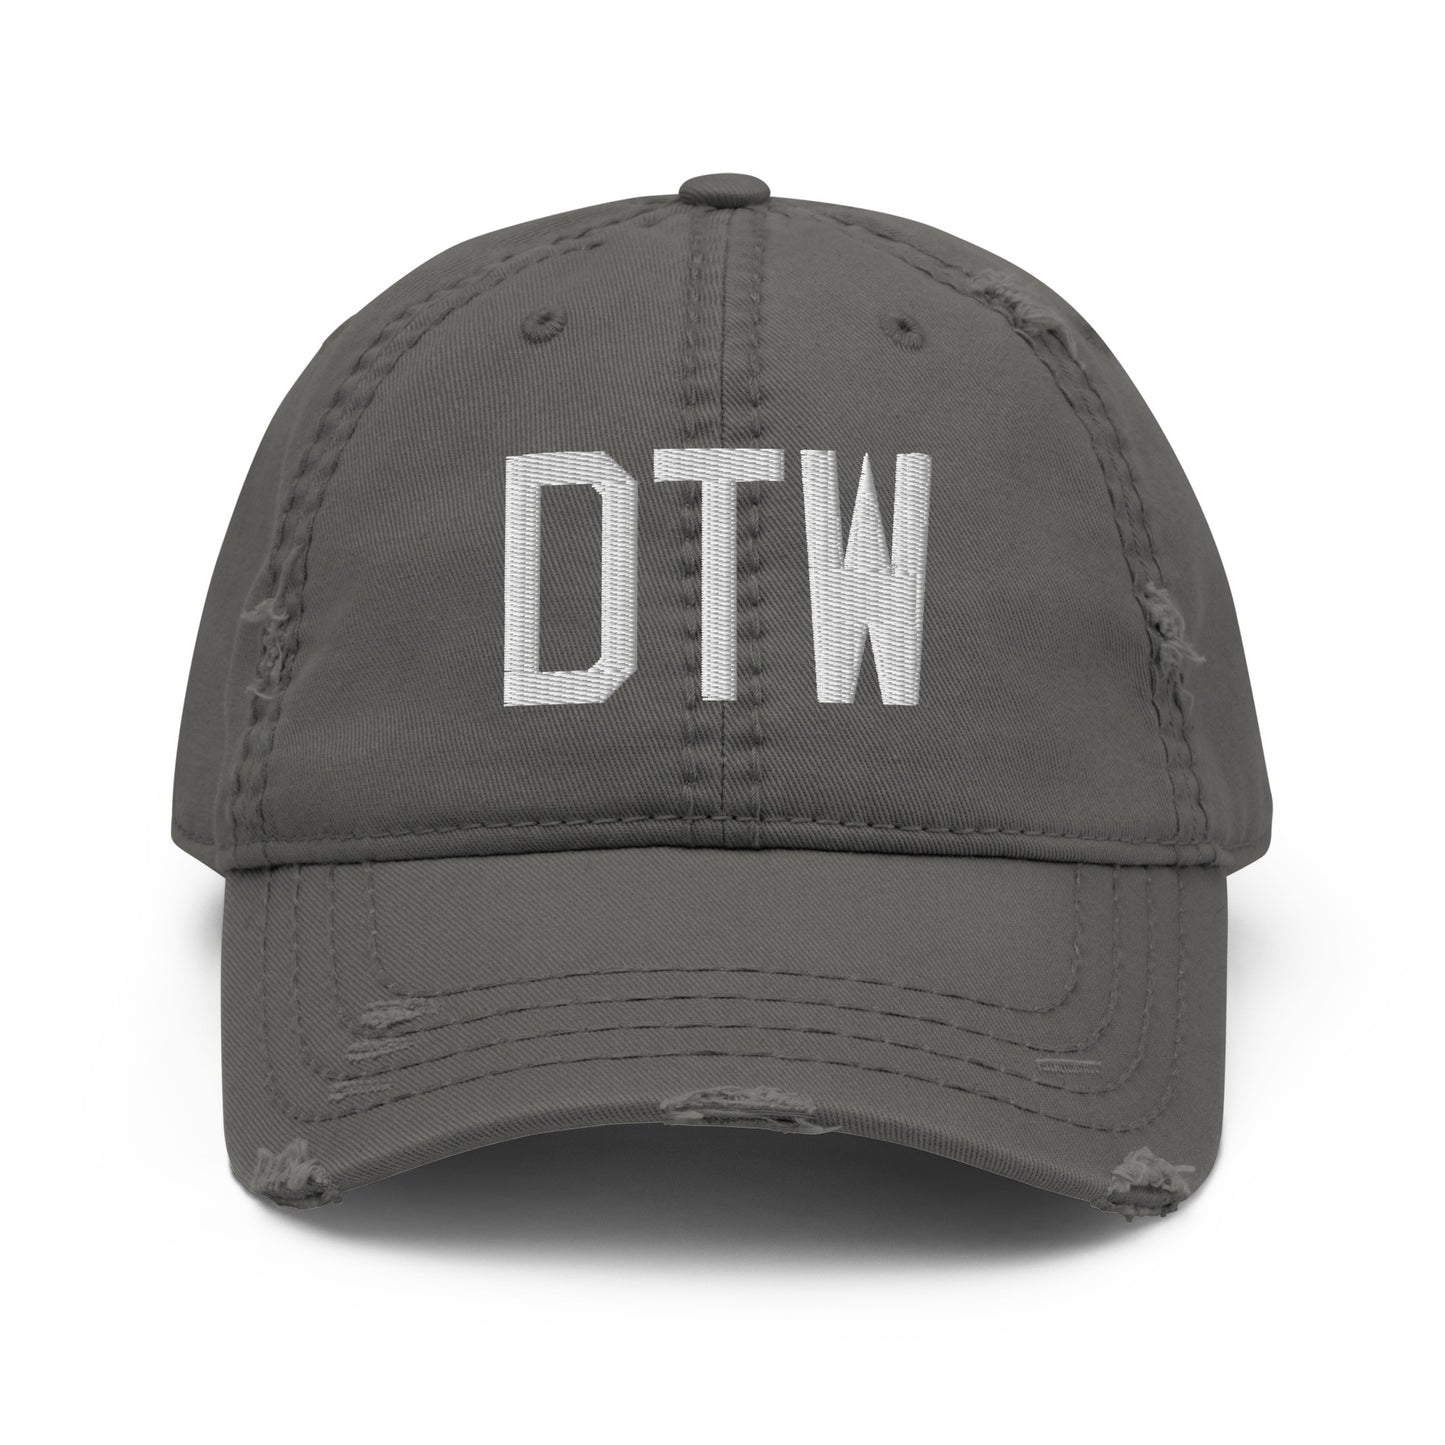 Airport Code Distressed Hat - White • DTW Detroit • YHM Designs - Image 15